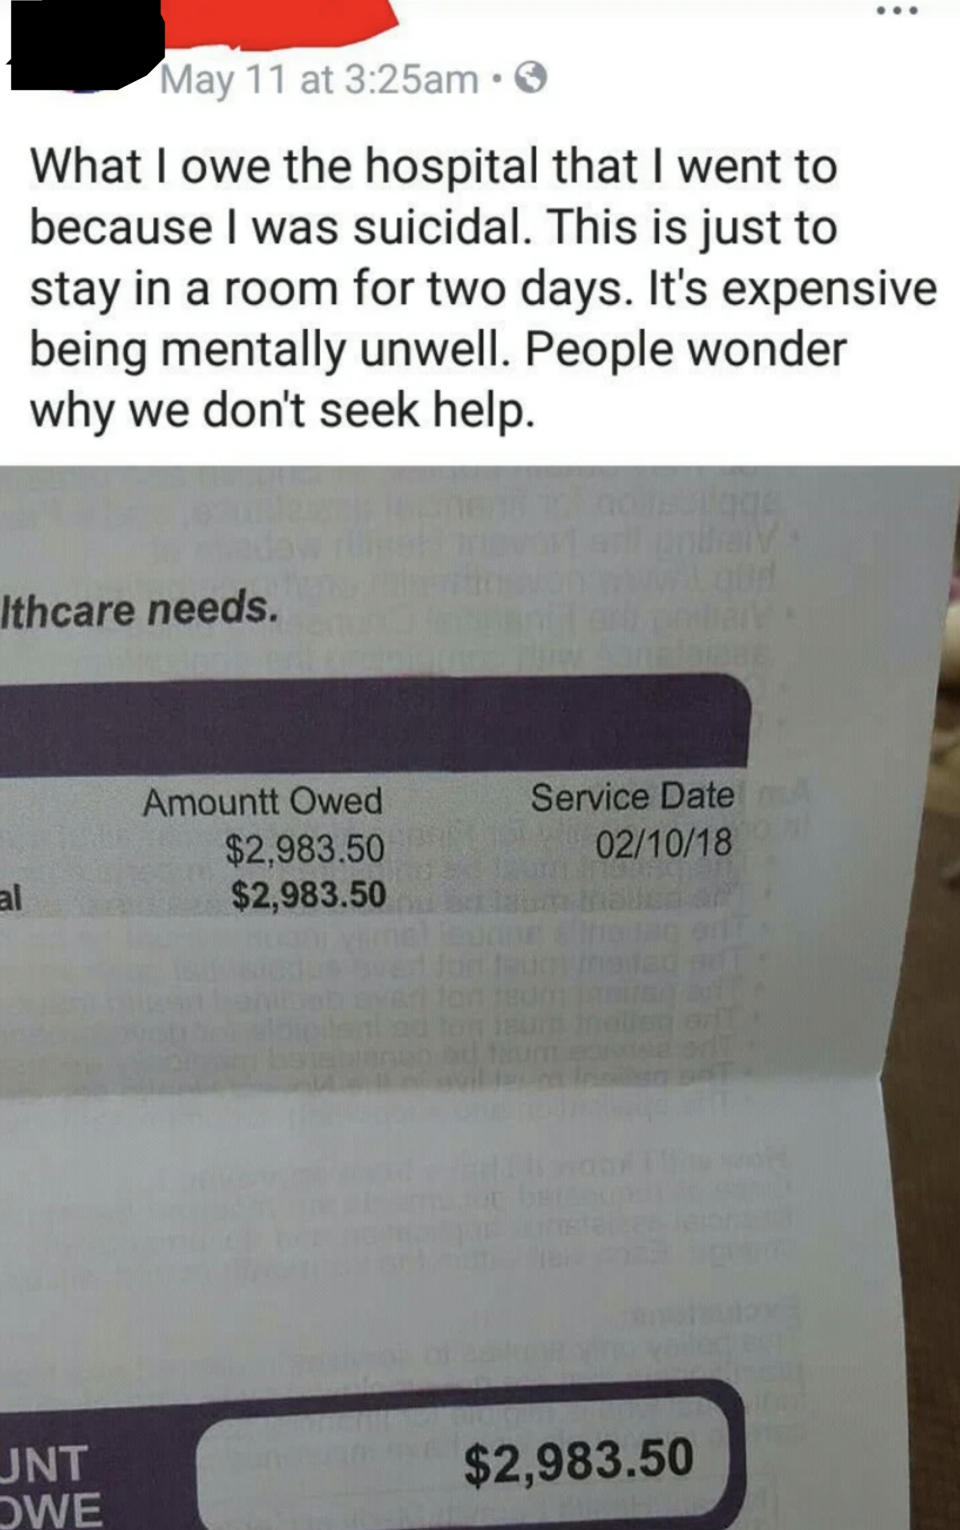 Tweet: "What I owe the hospital I went to because I was suicidal; this is just to stay in a room for two days; people wonder why we don't seek help" and a bill for $2,983